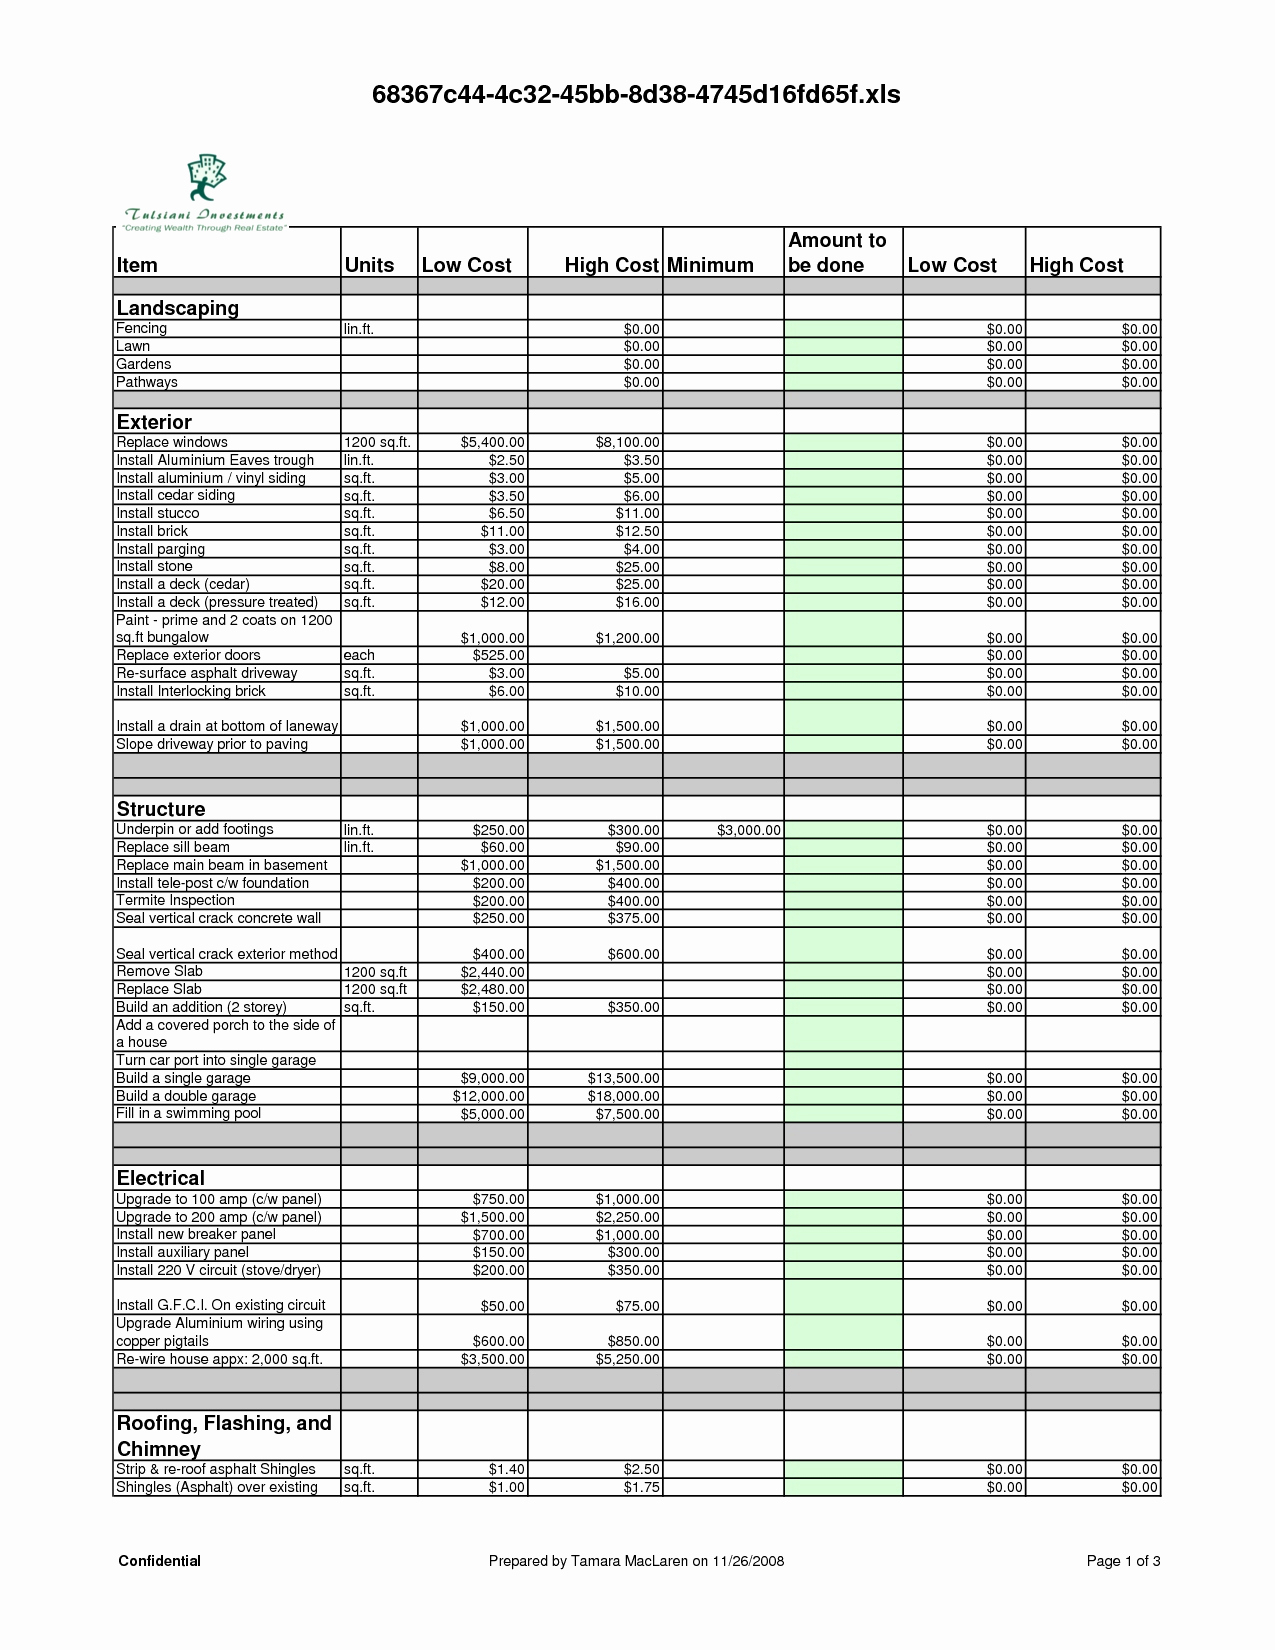 Home Remodel Cost Spreadsheet Best Of Home Remodel Cost Spreadsheet Inside Home Remodeling Cost Estimate Template